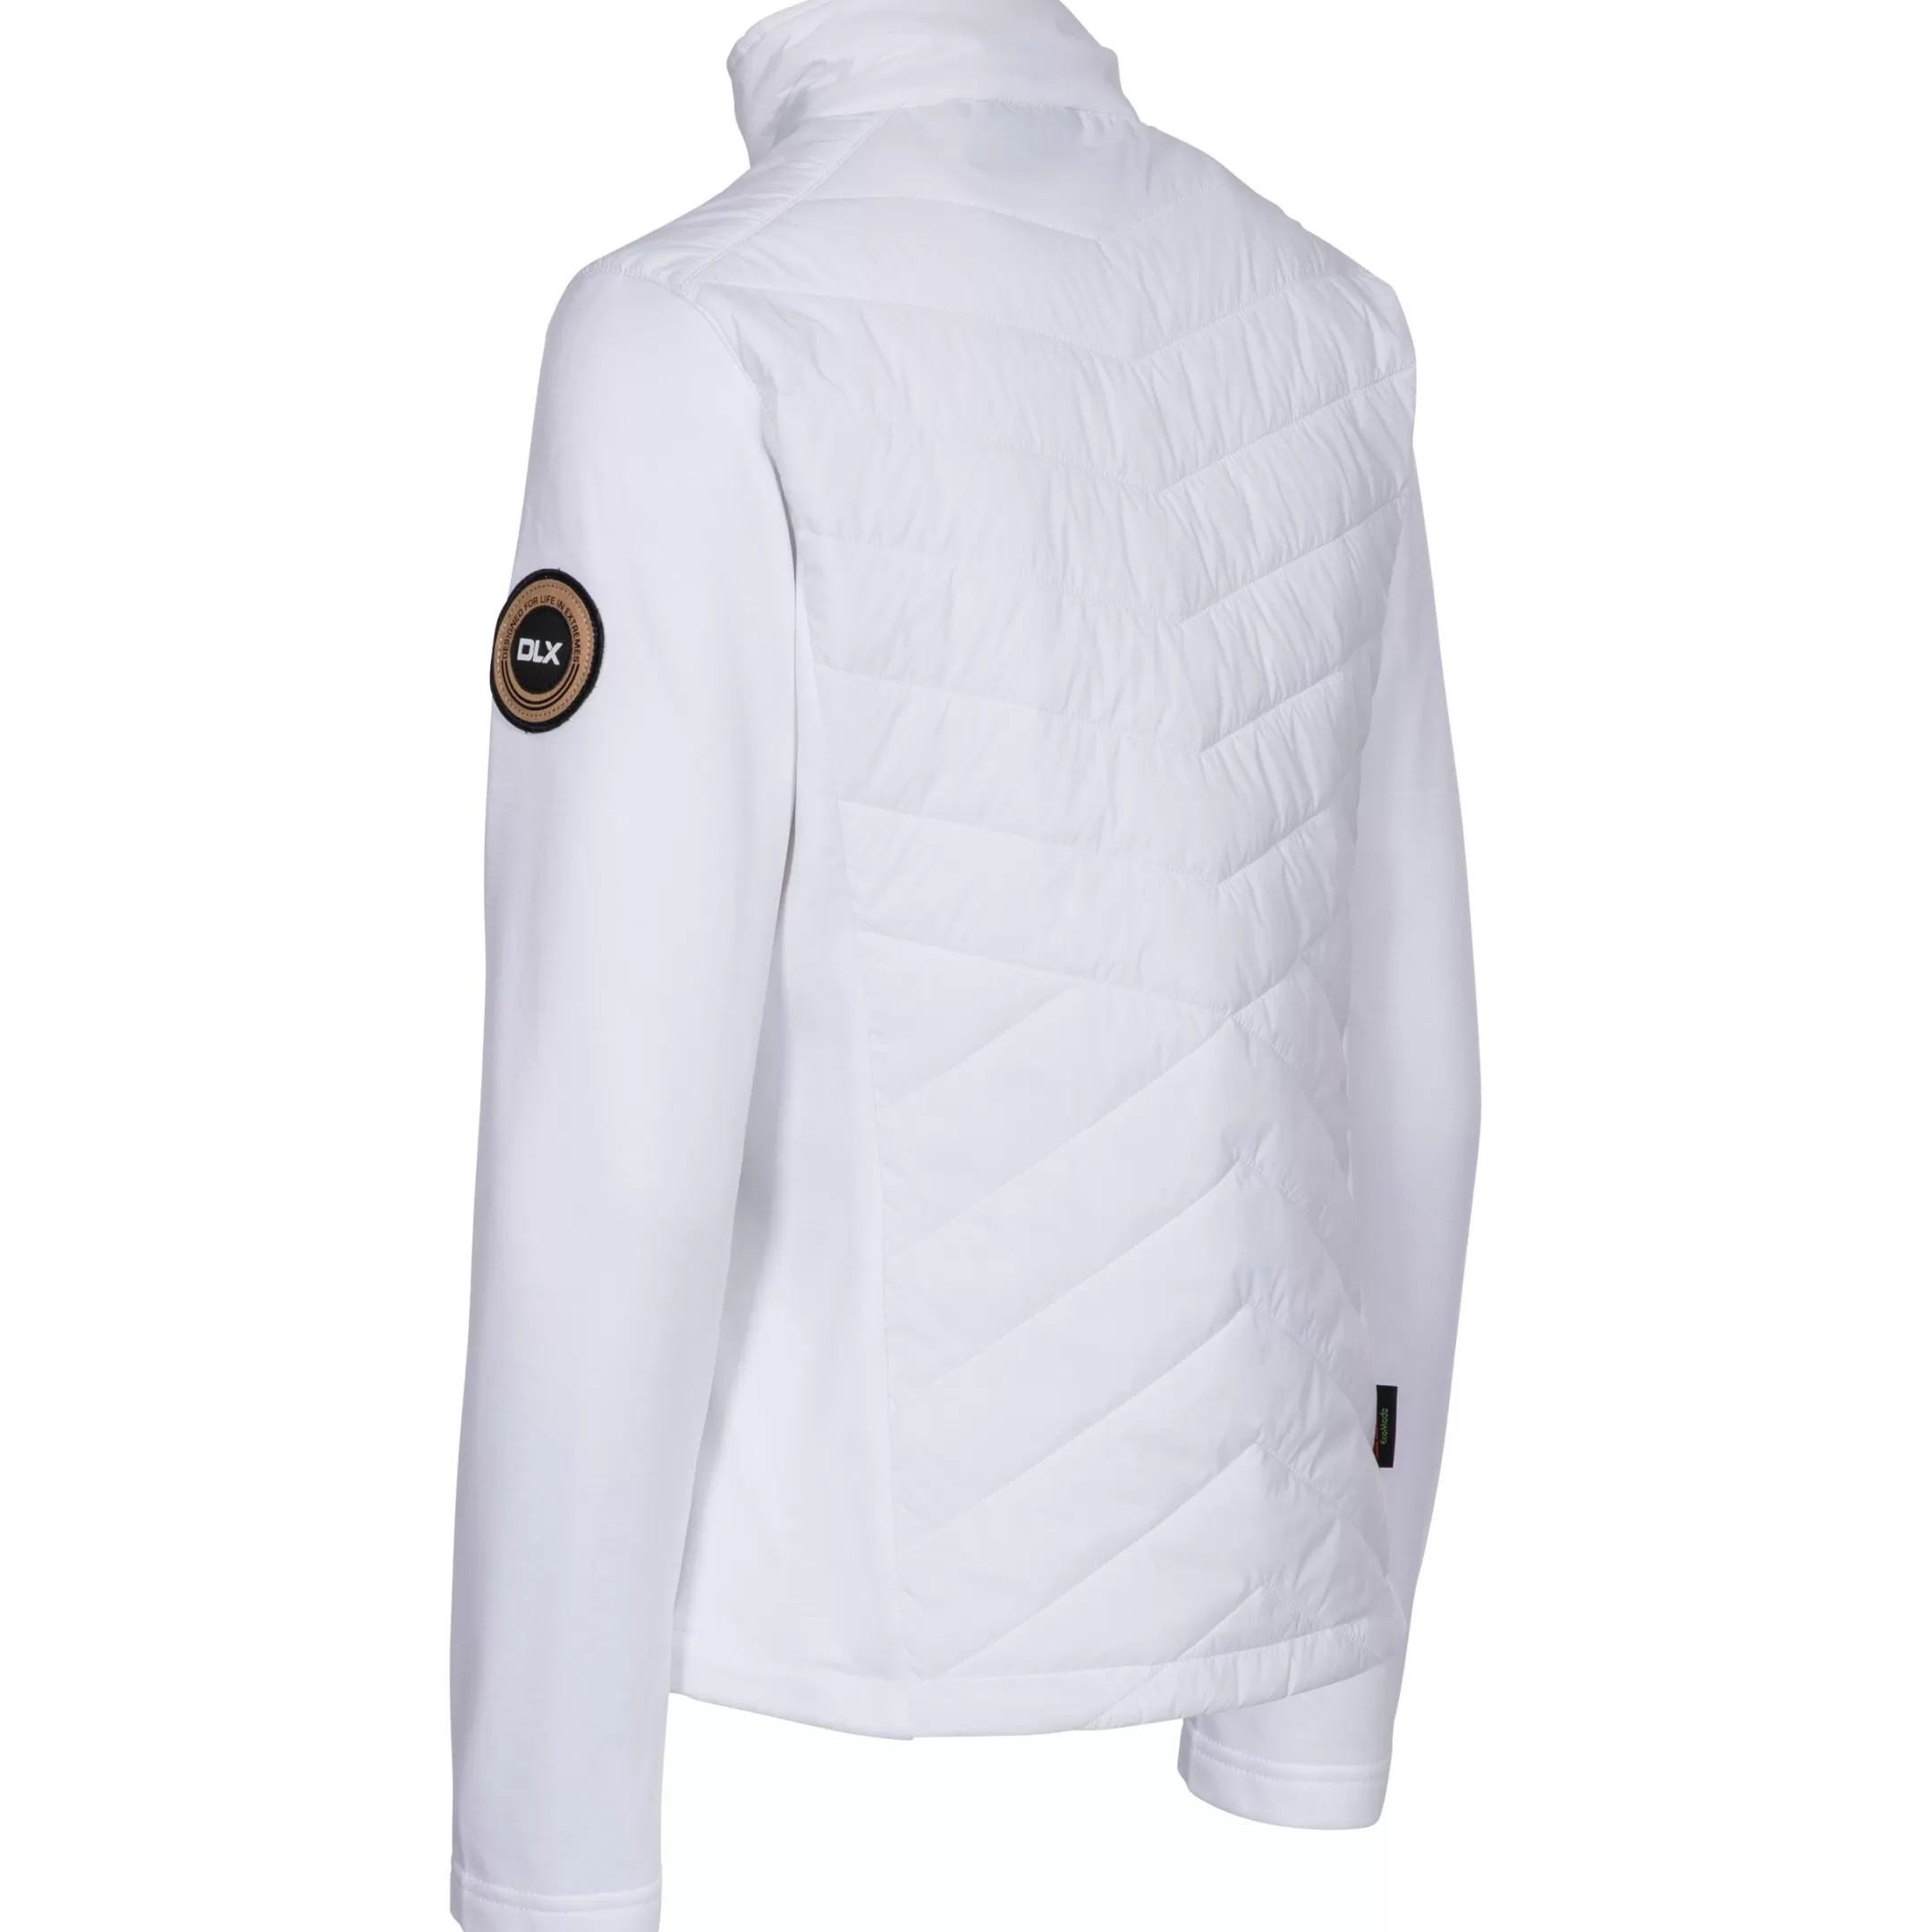 Magda Women's DLX Active Jacket with Padded Body | Trespass Online